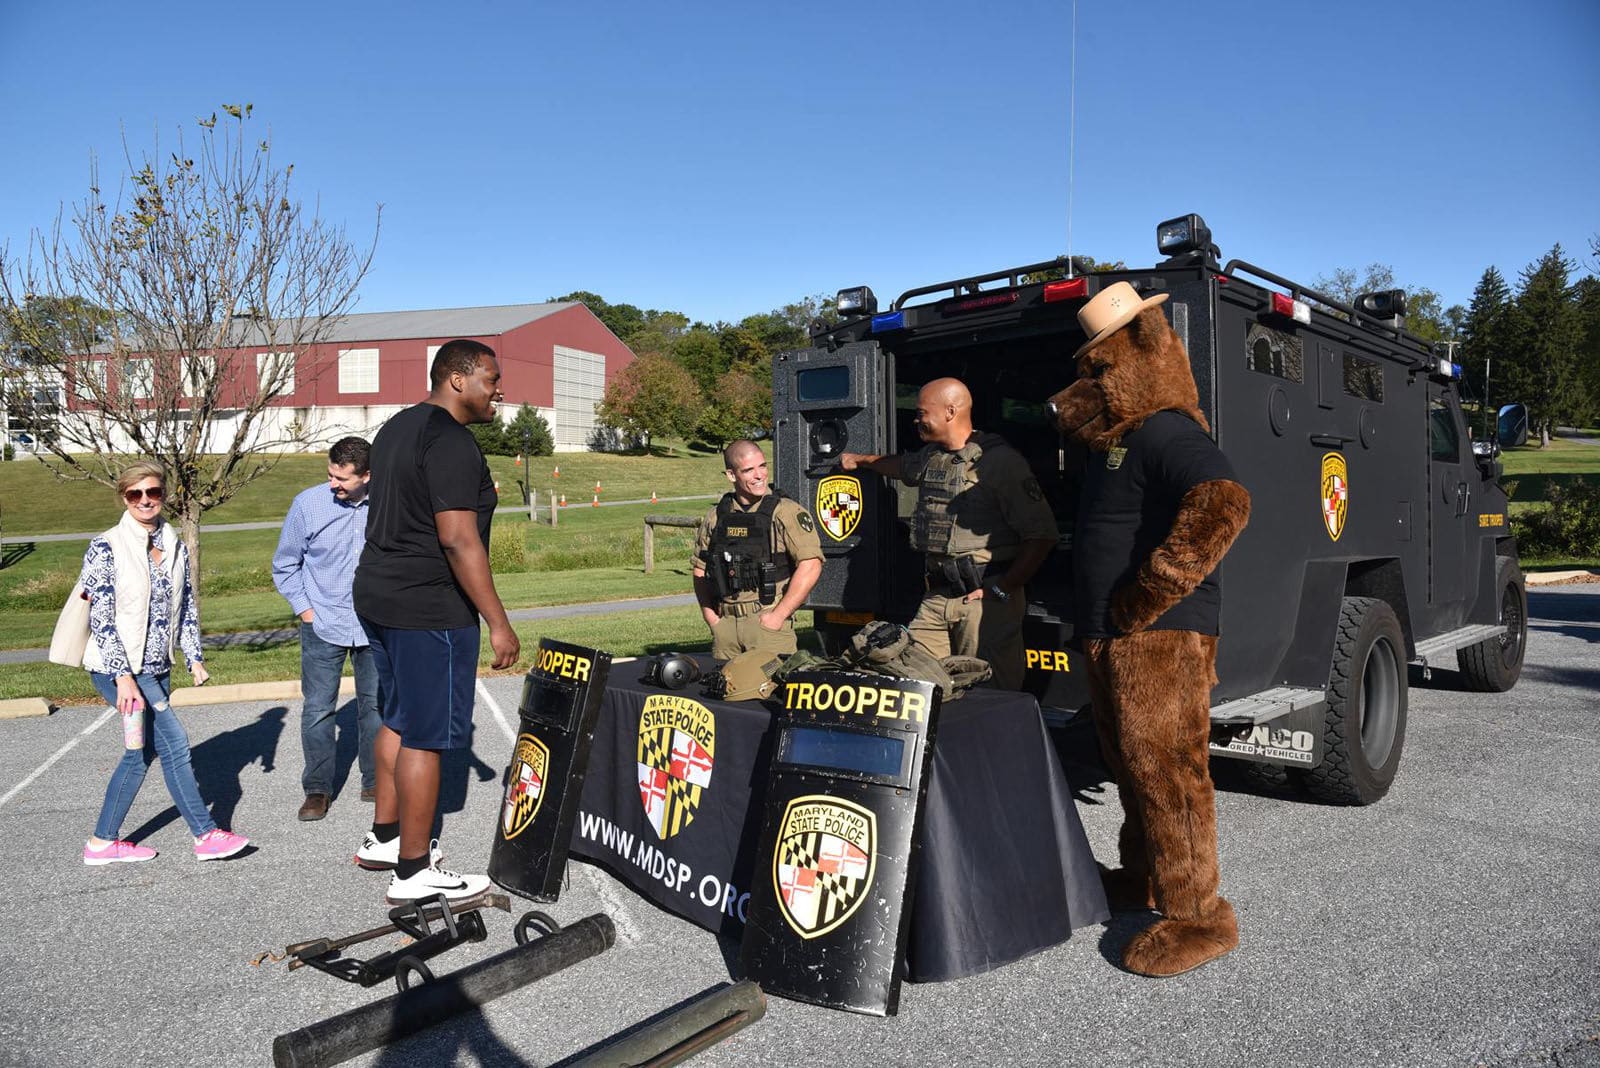 The event page promises an appearance from the Maryland State Police mascot, as well as Maryland State Police troopers to answer questions about having a career with the department. (Courtesy of Maryland State Police)